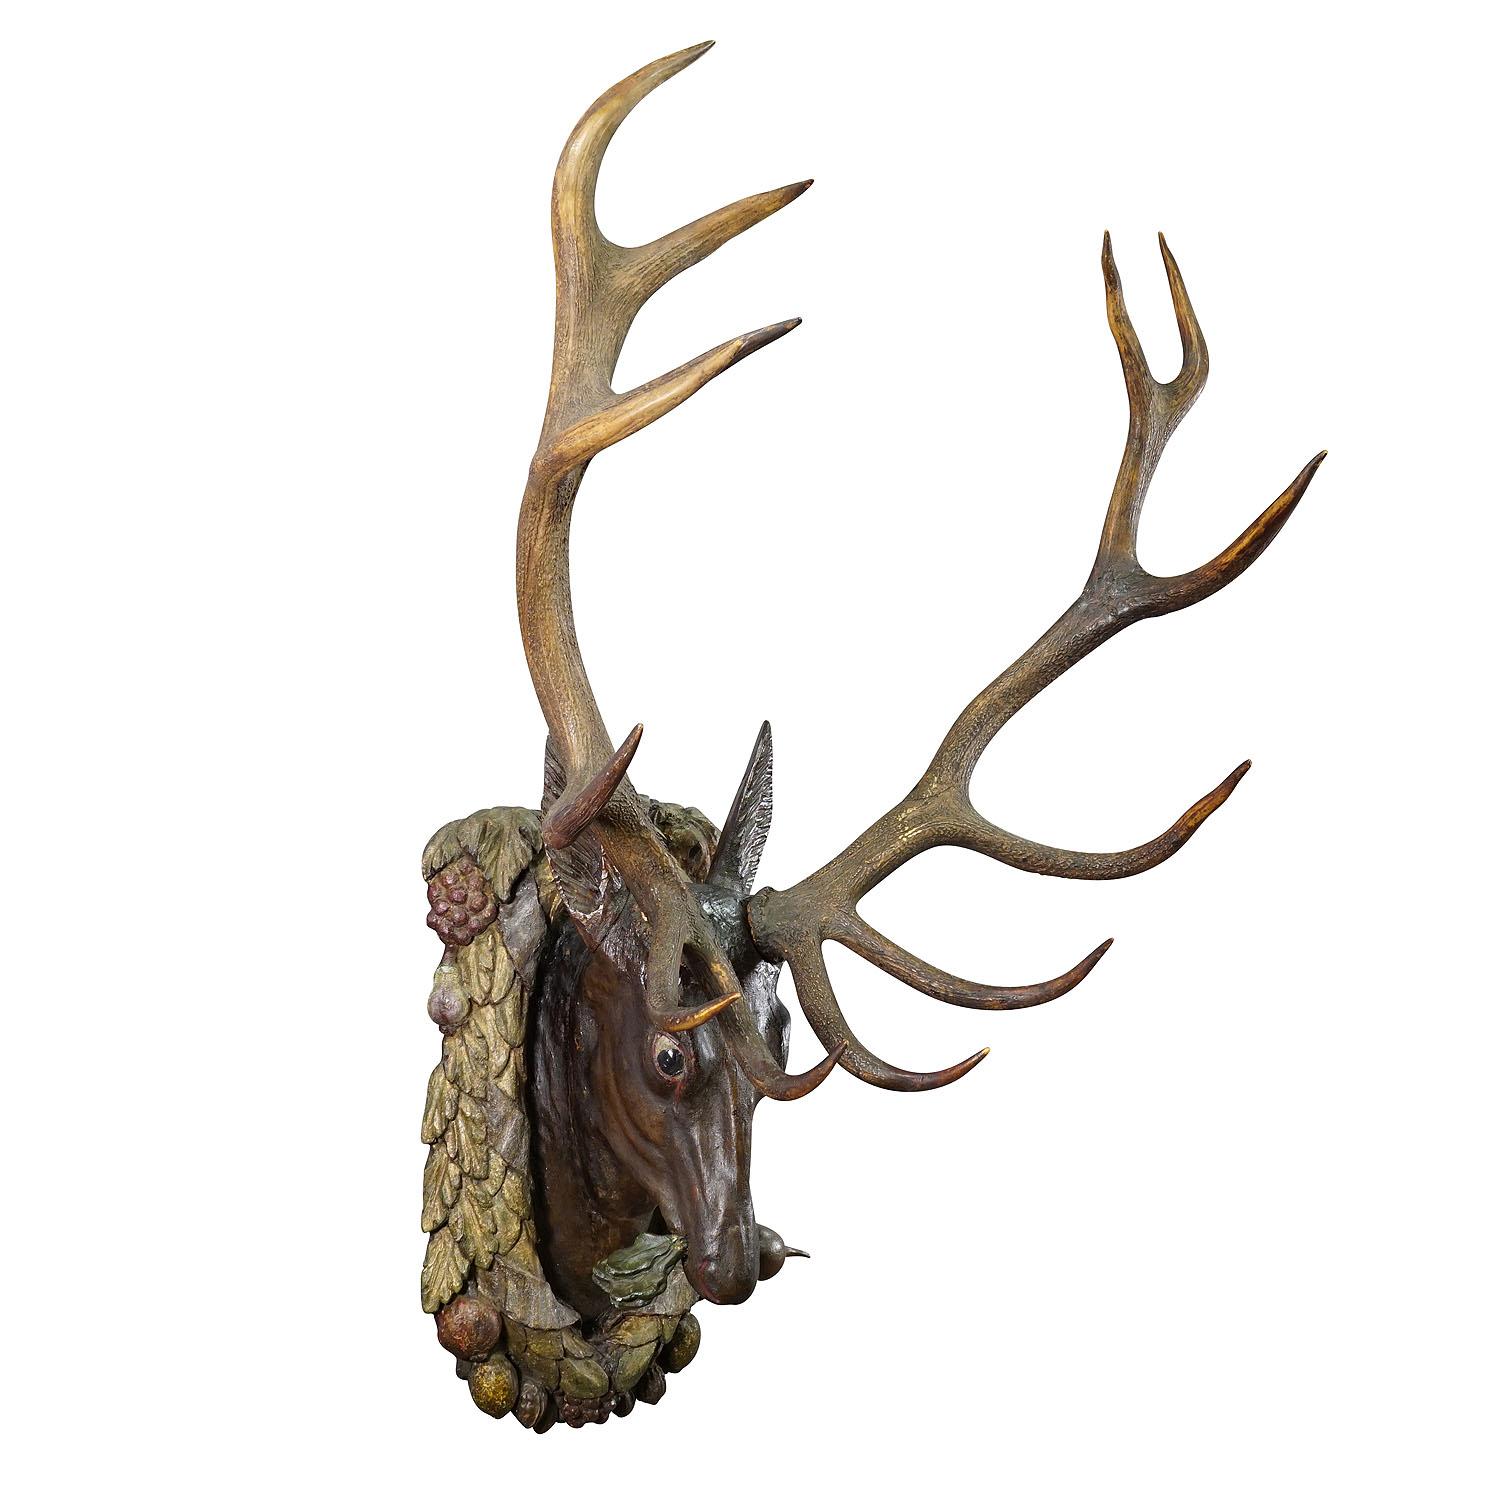 Large Antique Wooden Carved Black Forest Baroque Stag Head

A large antique Black Forest baroque deer head. Carved in typical abstract style of the early 18th century. It is mounted on a garland-like wooden carved plaque depicting fruits and